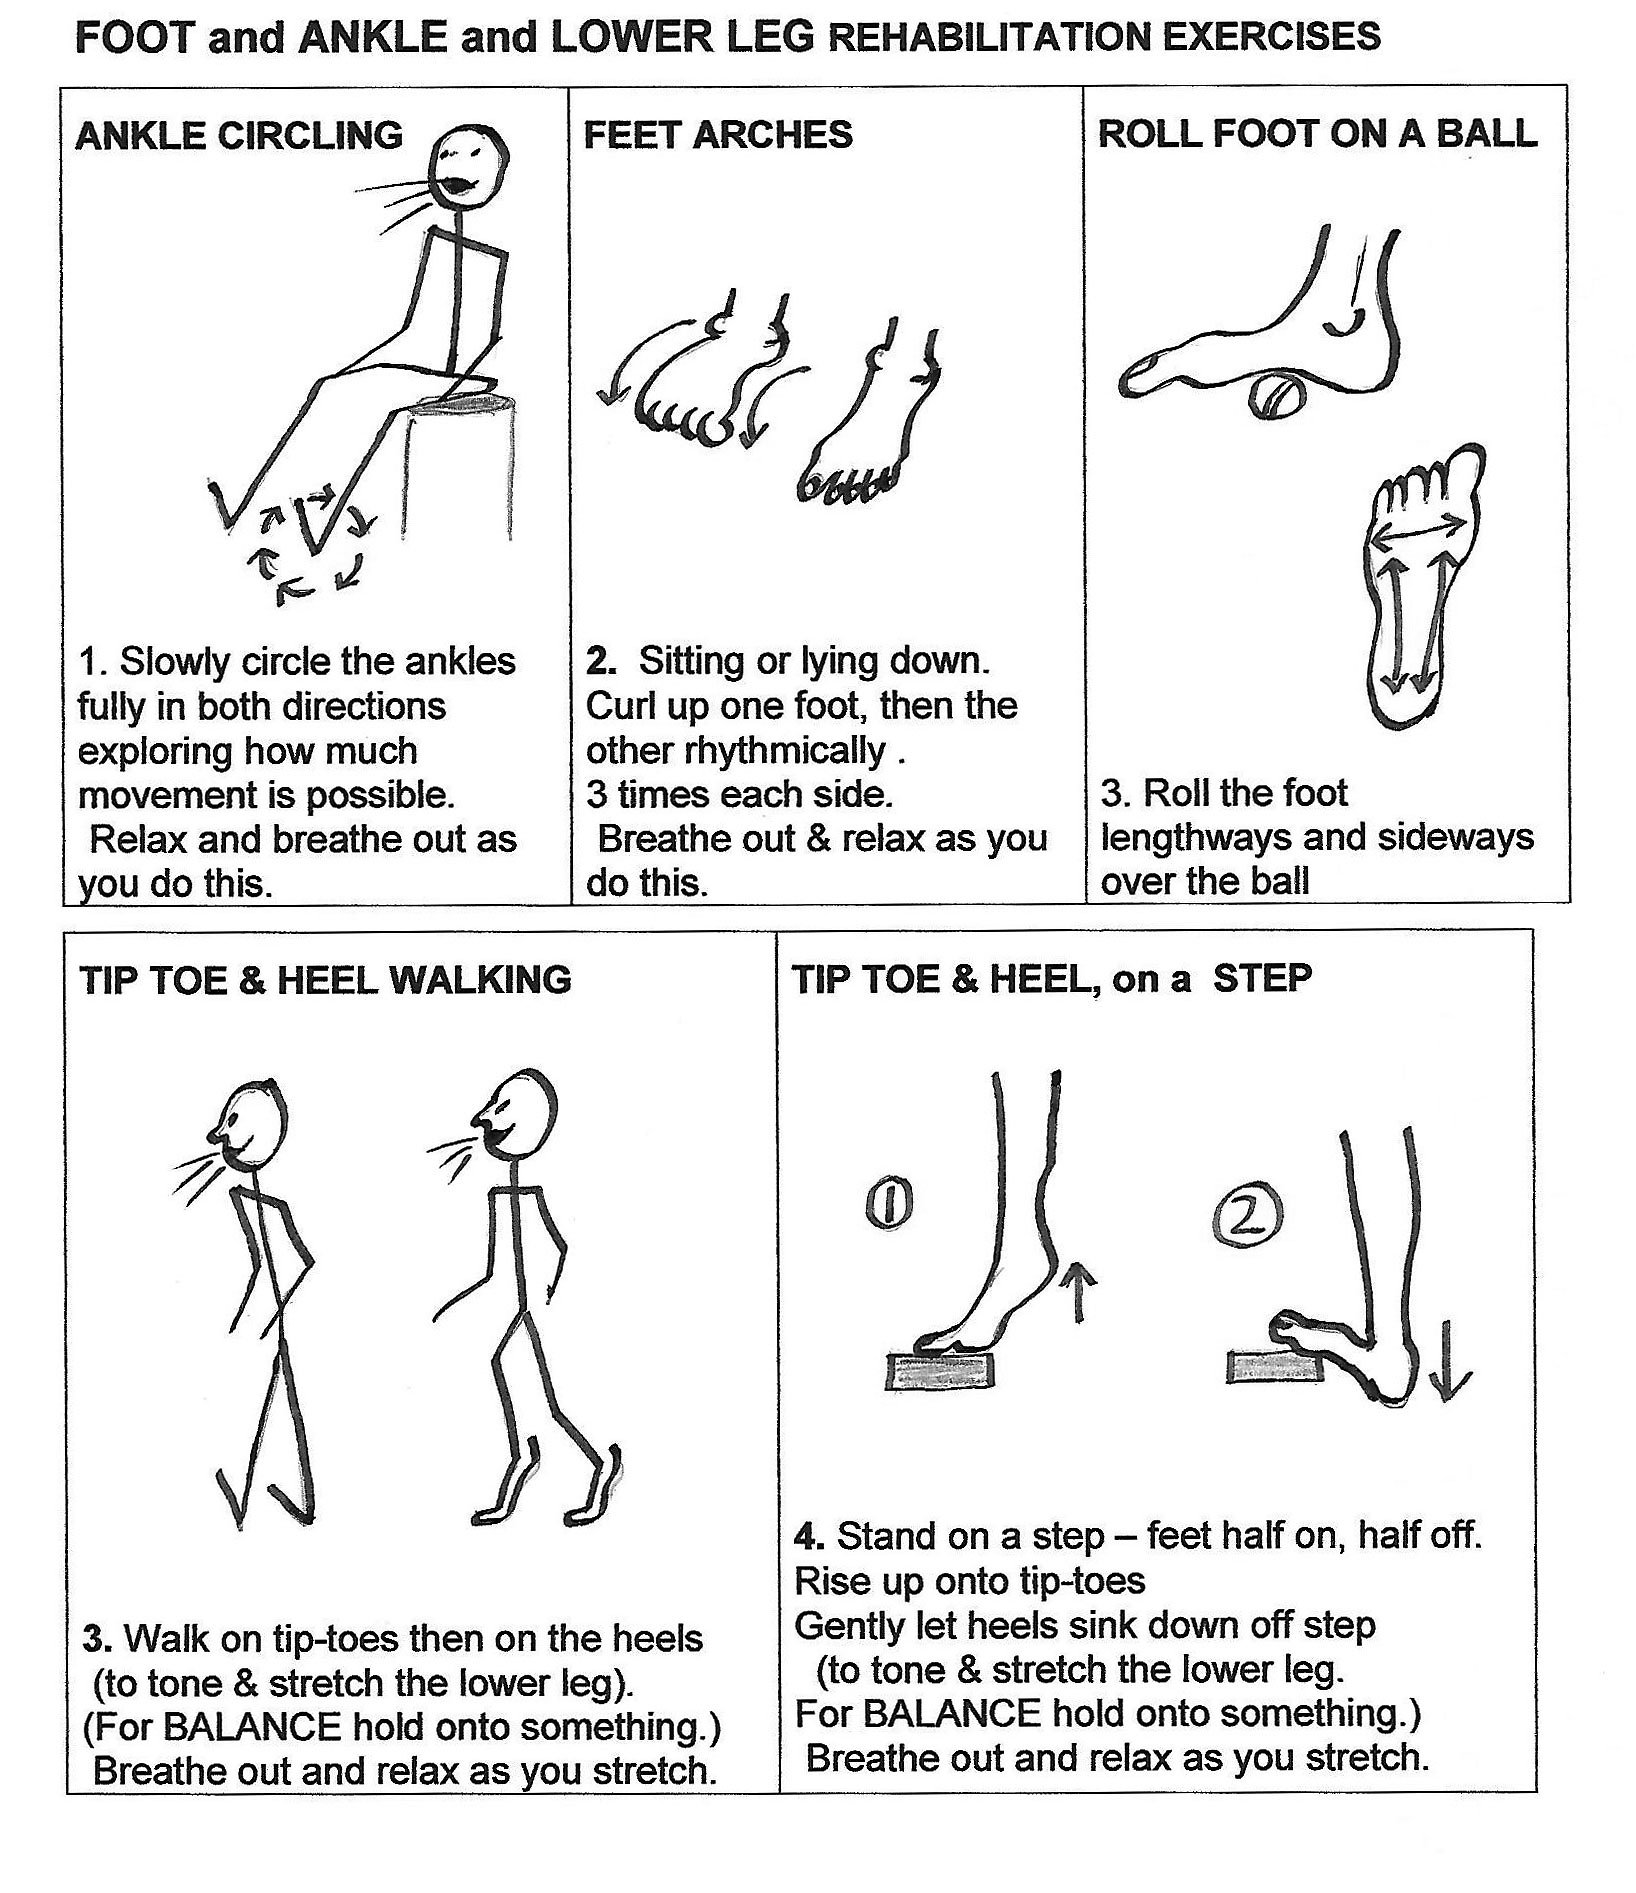 Easy Home Exercises . Foot & Ankle Home Excersize